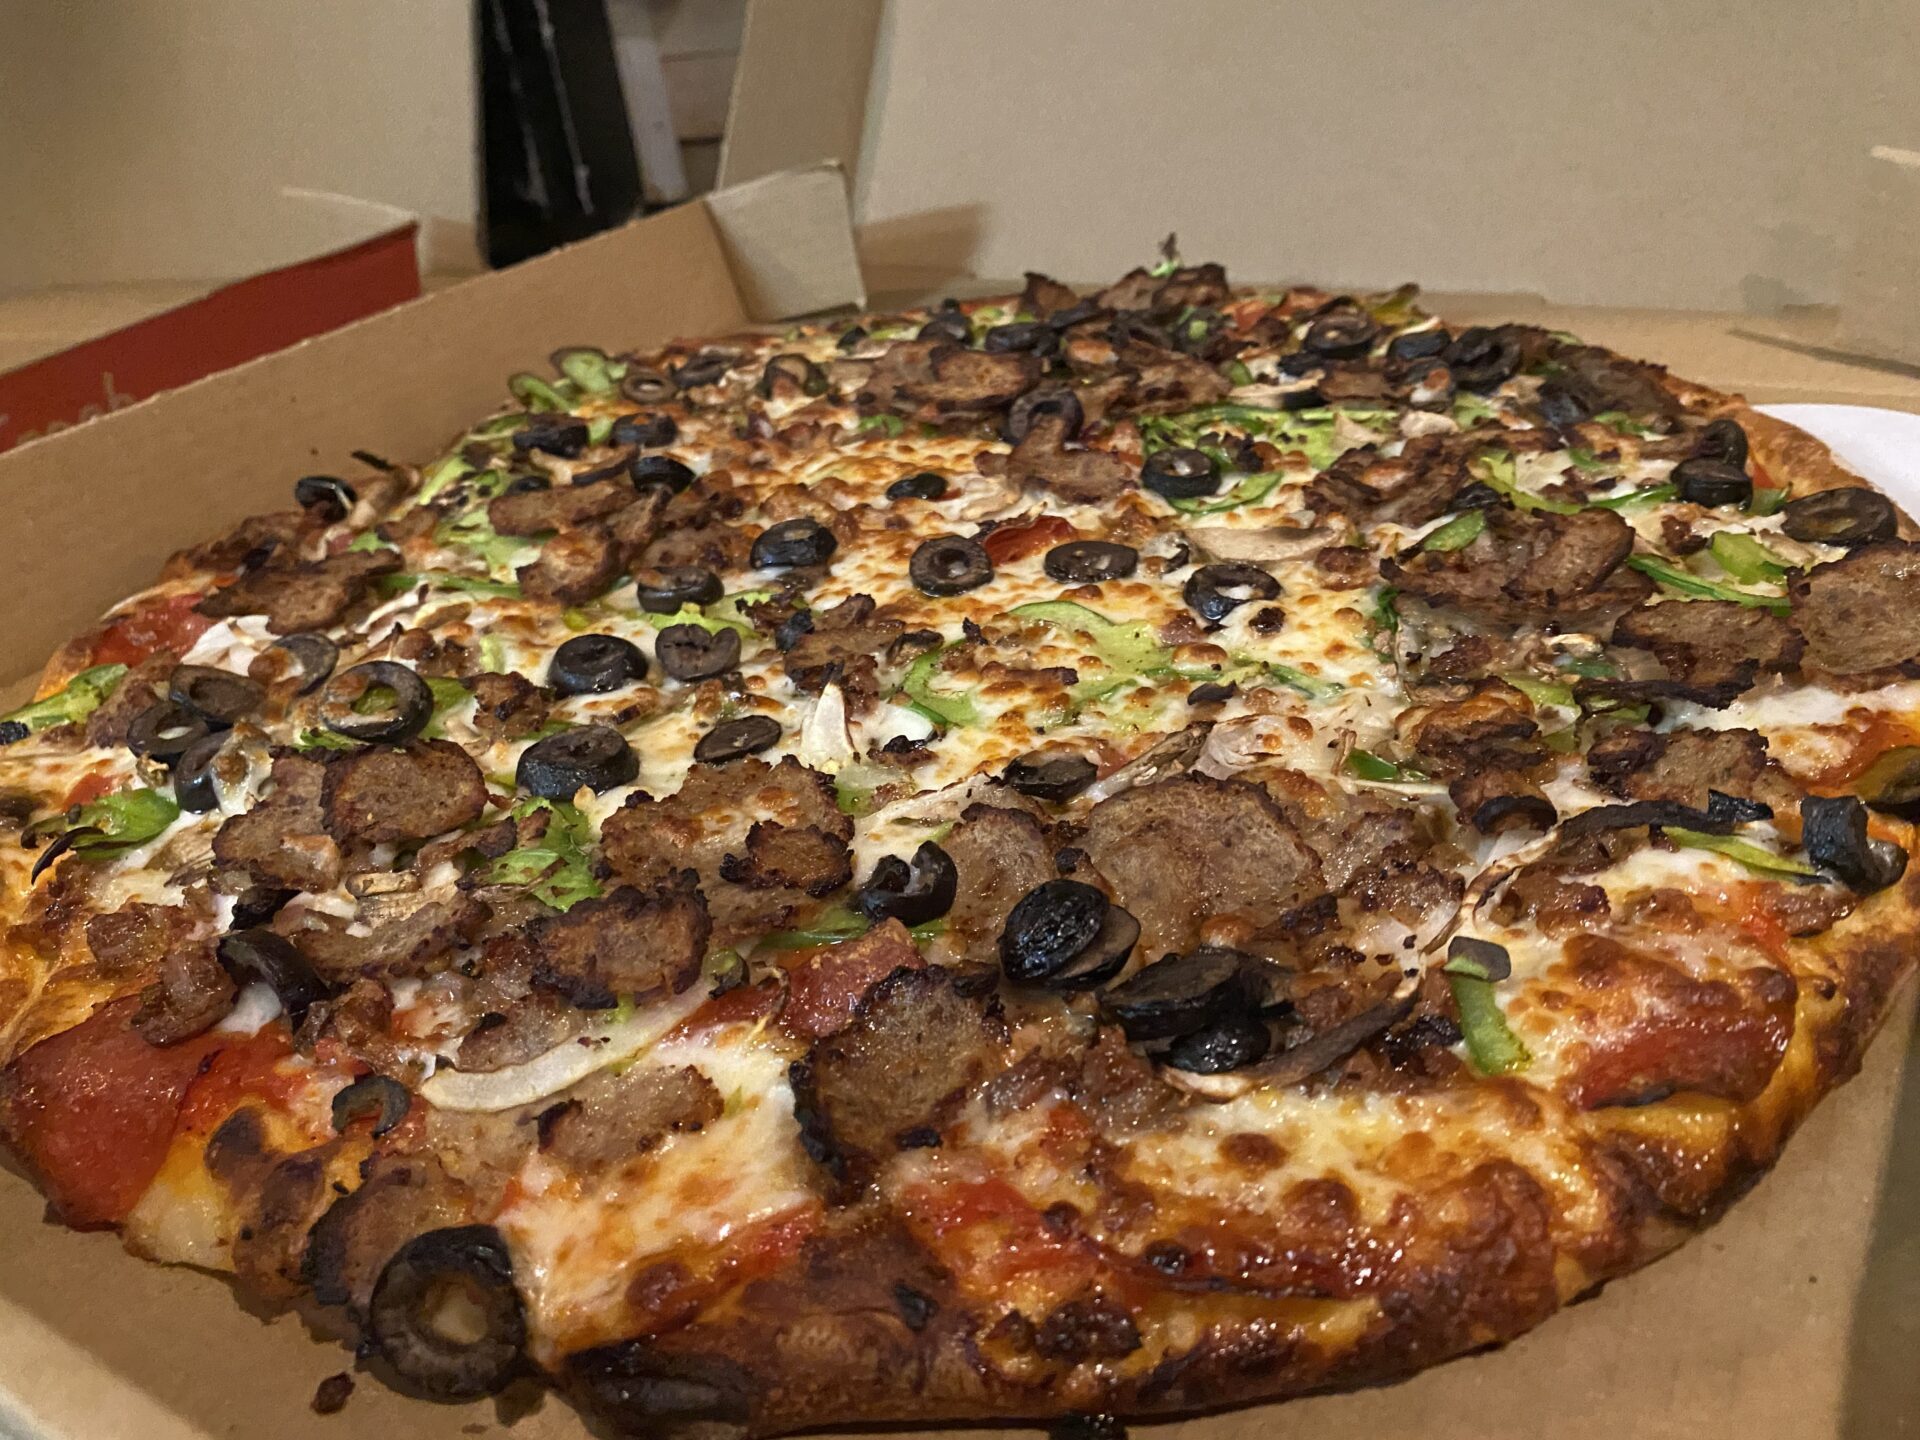 A pizza sitting on top of a box covered in toppings.